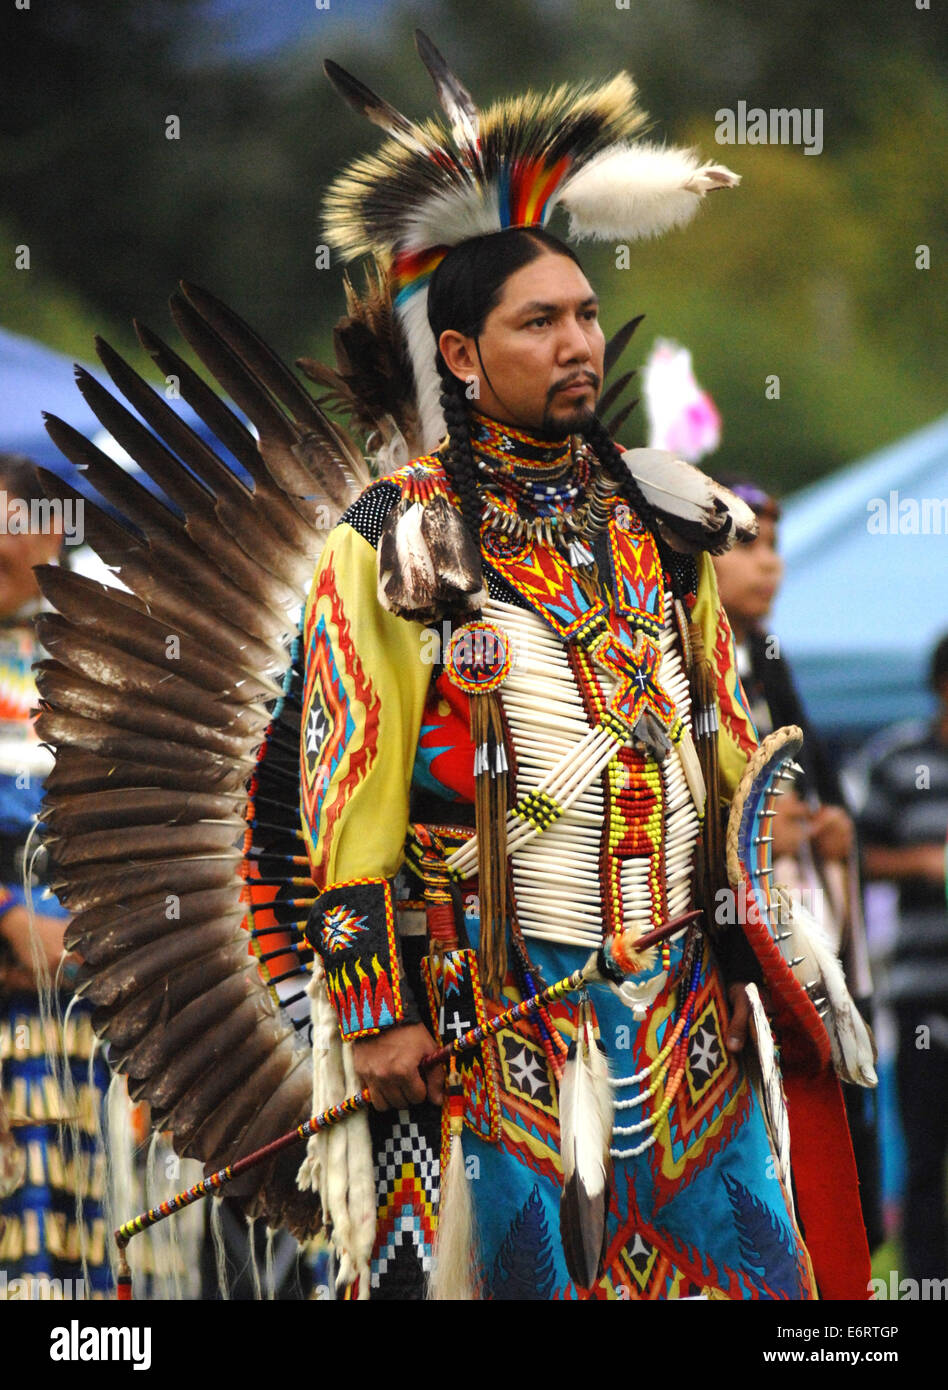 Vancouver, Canada. 29th Aug, 2014. A native Indian man participates in ...